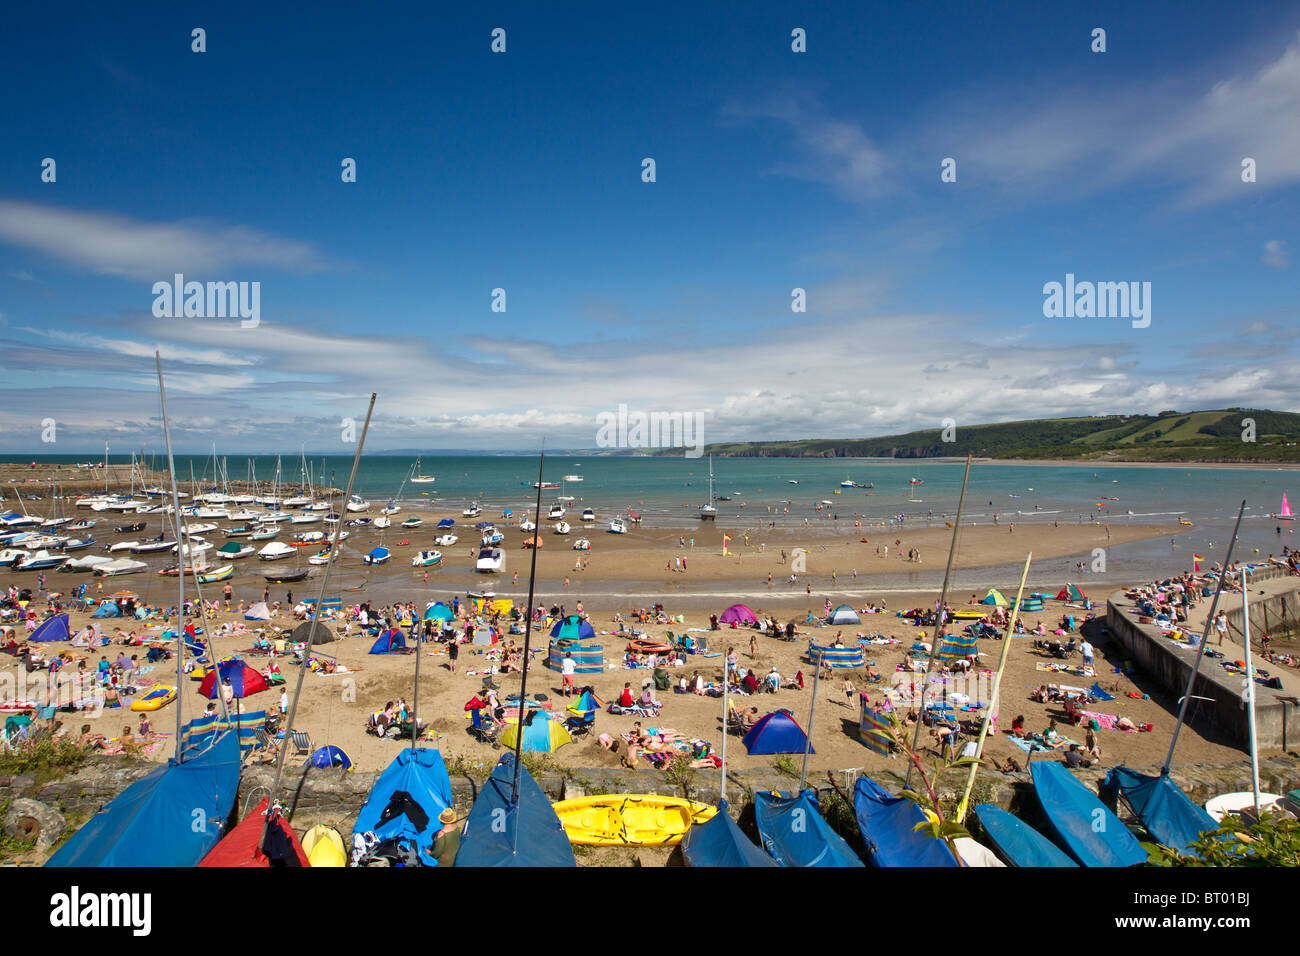 A packed New Quay Beach in Wales during British Summer time Stock Photo